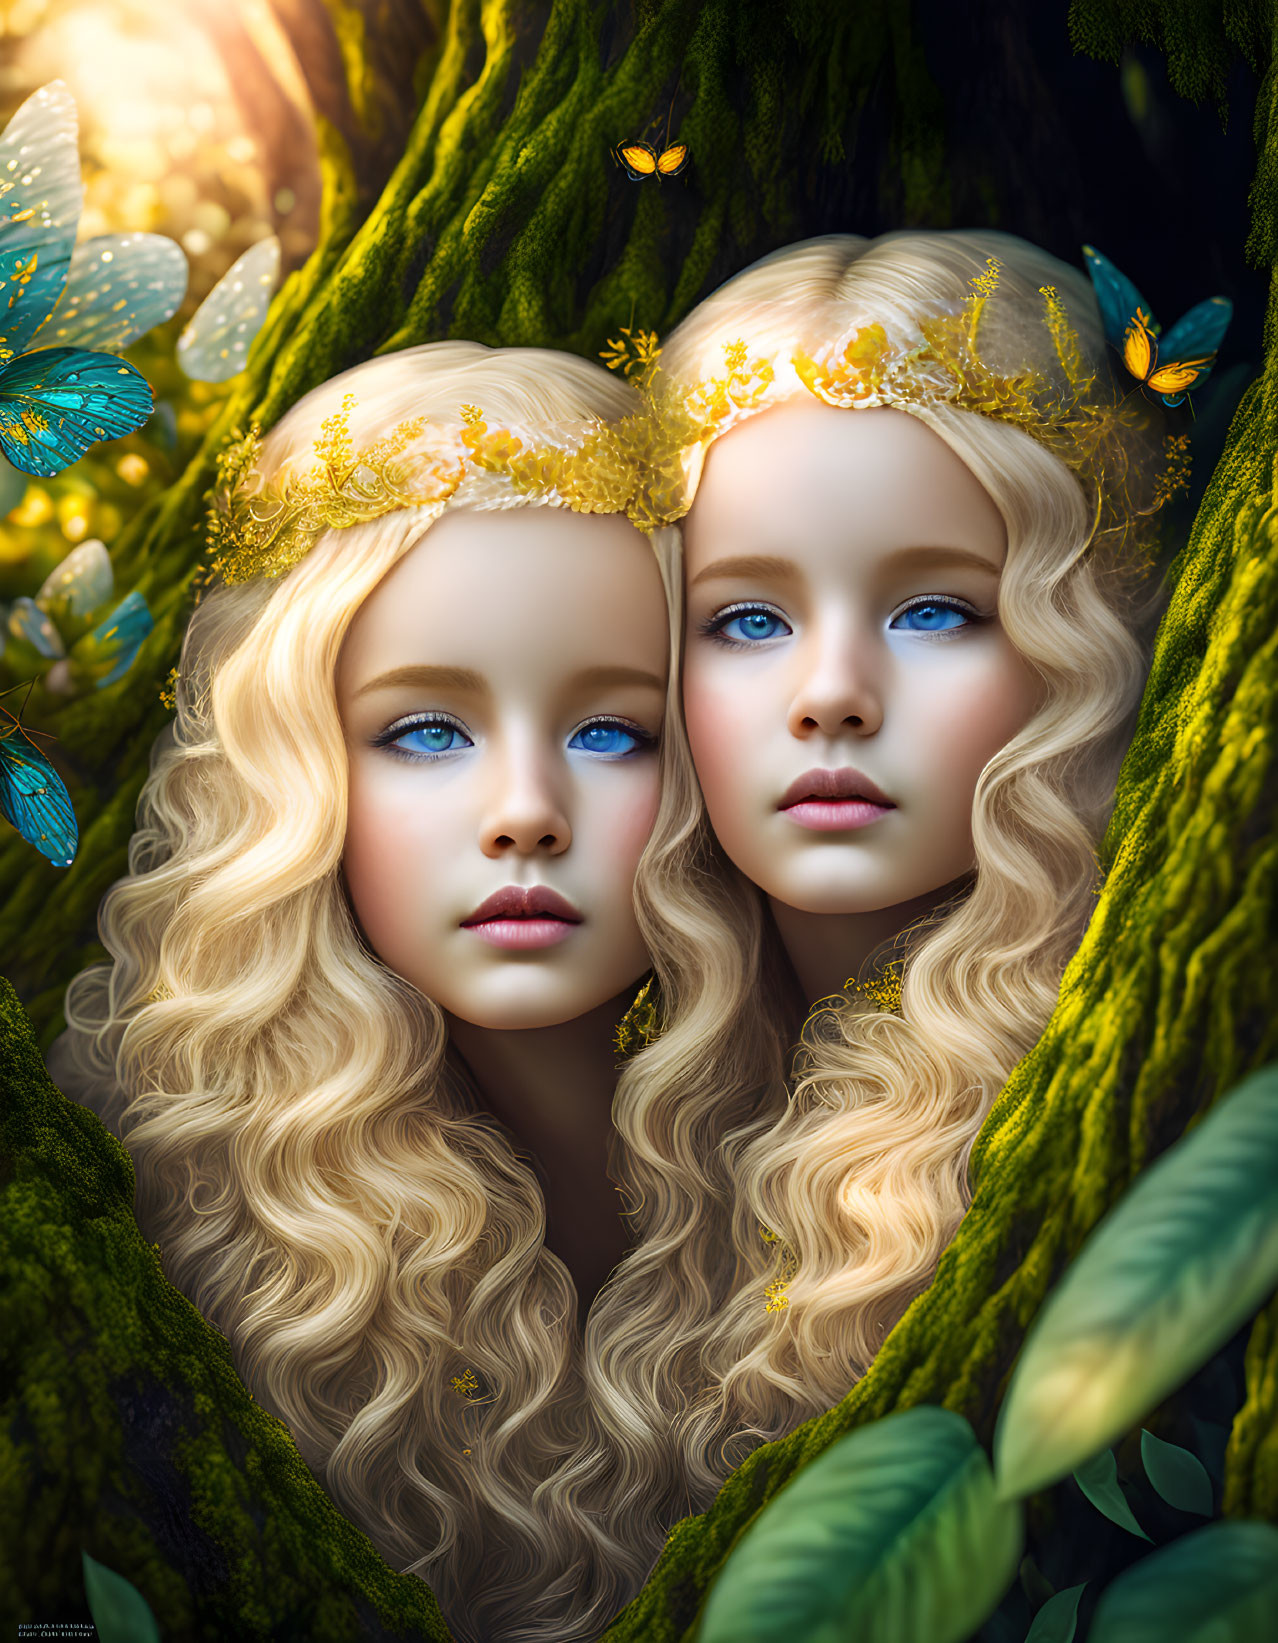 Identical girls with golden crowns and blue eyes in tree crevice with butterflies.